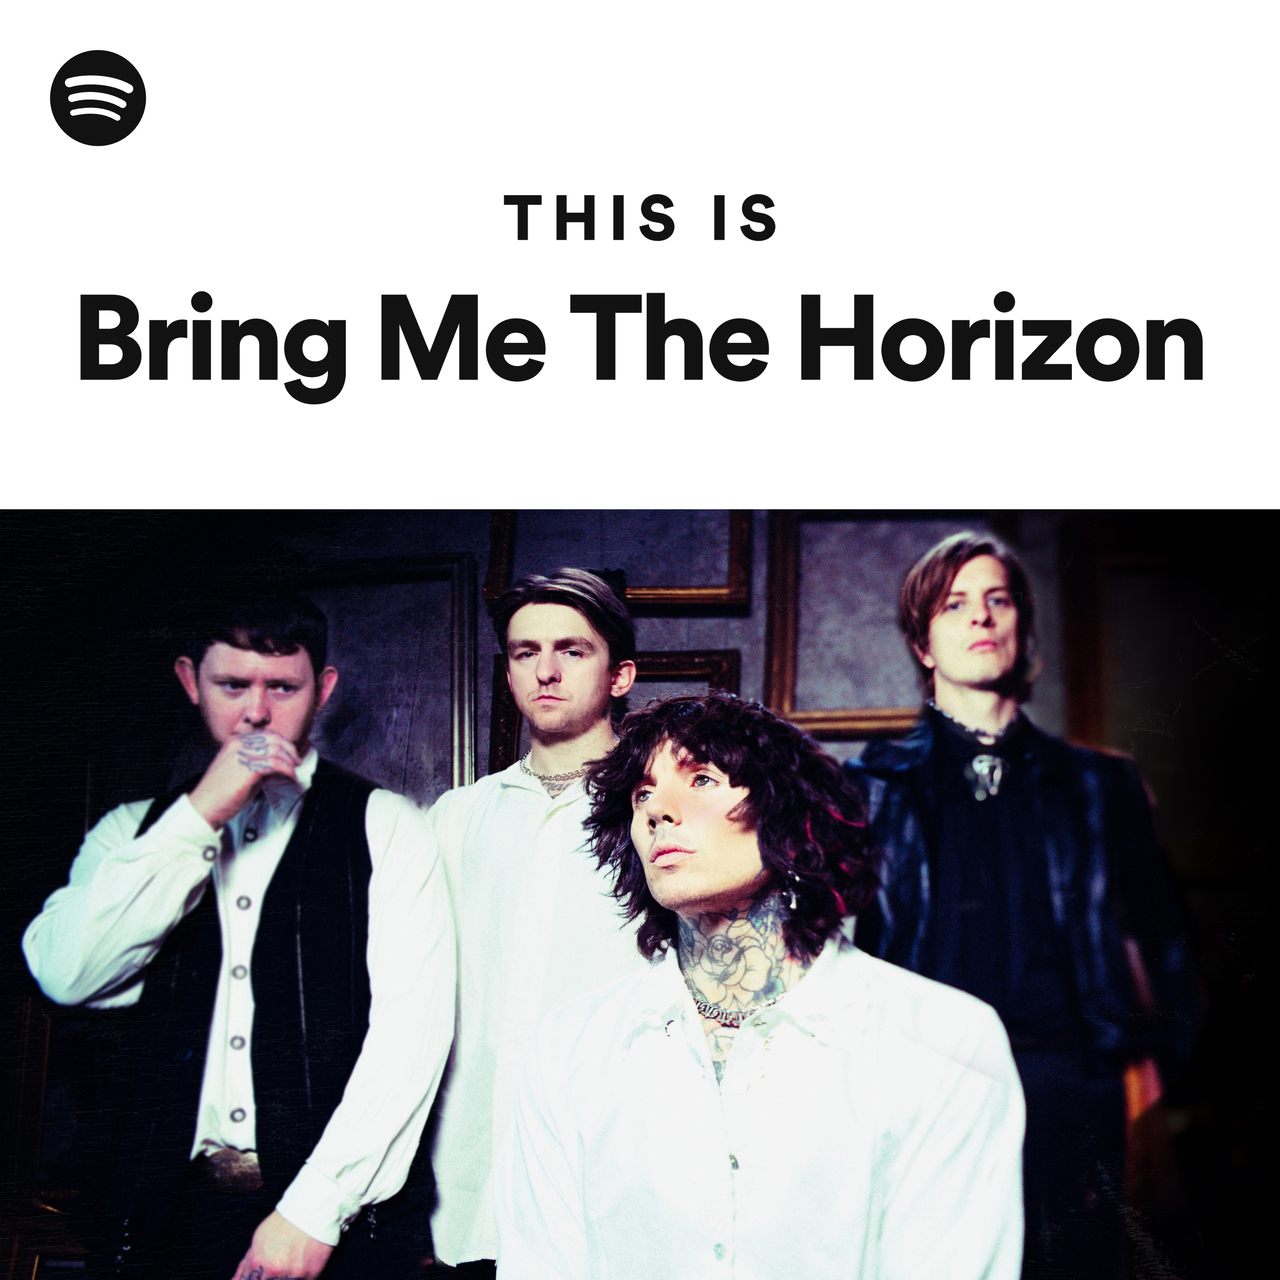 BRING ME THE HORIZON added a new photo. - BRING ME THE HORIZON